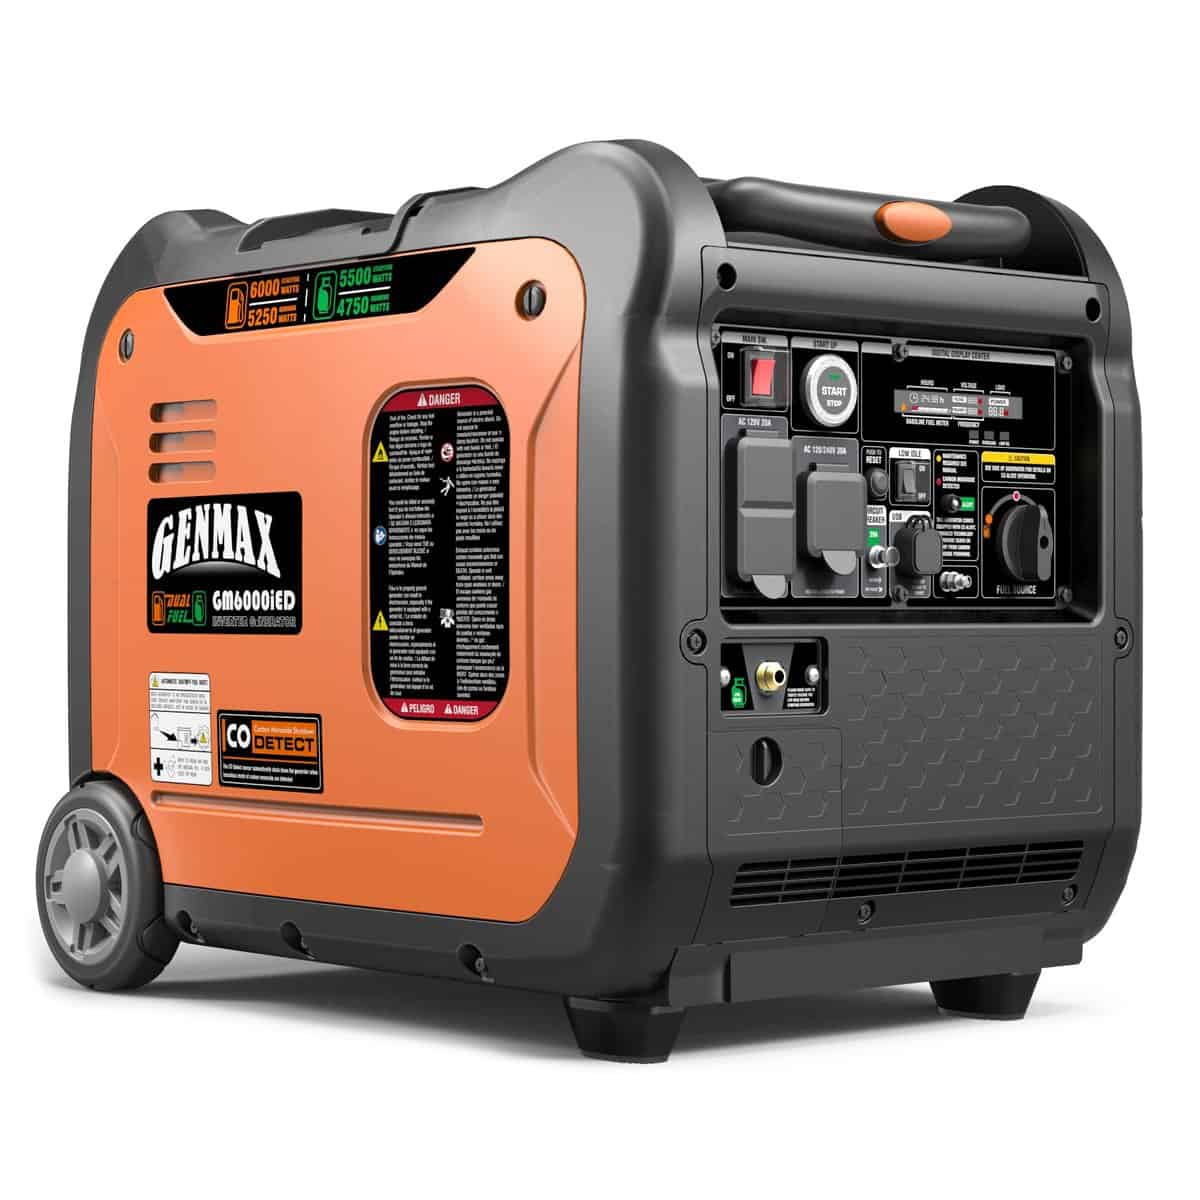 Portable Inverter Generators for home backup power and quiet operation.